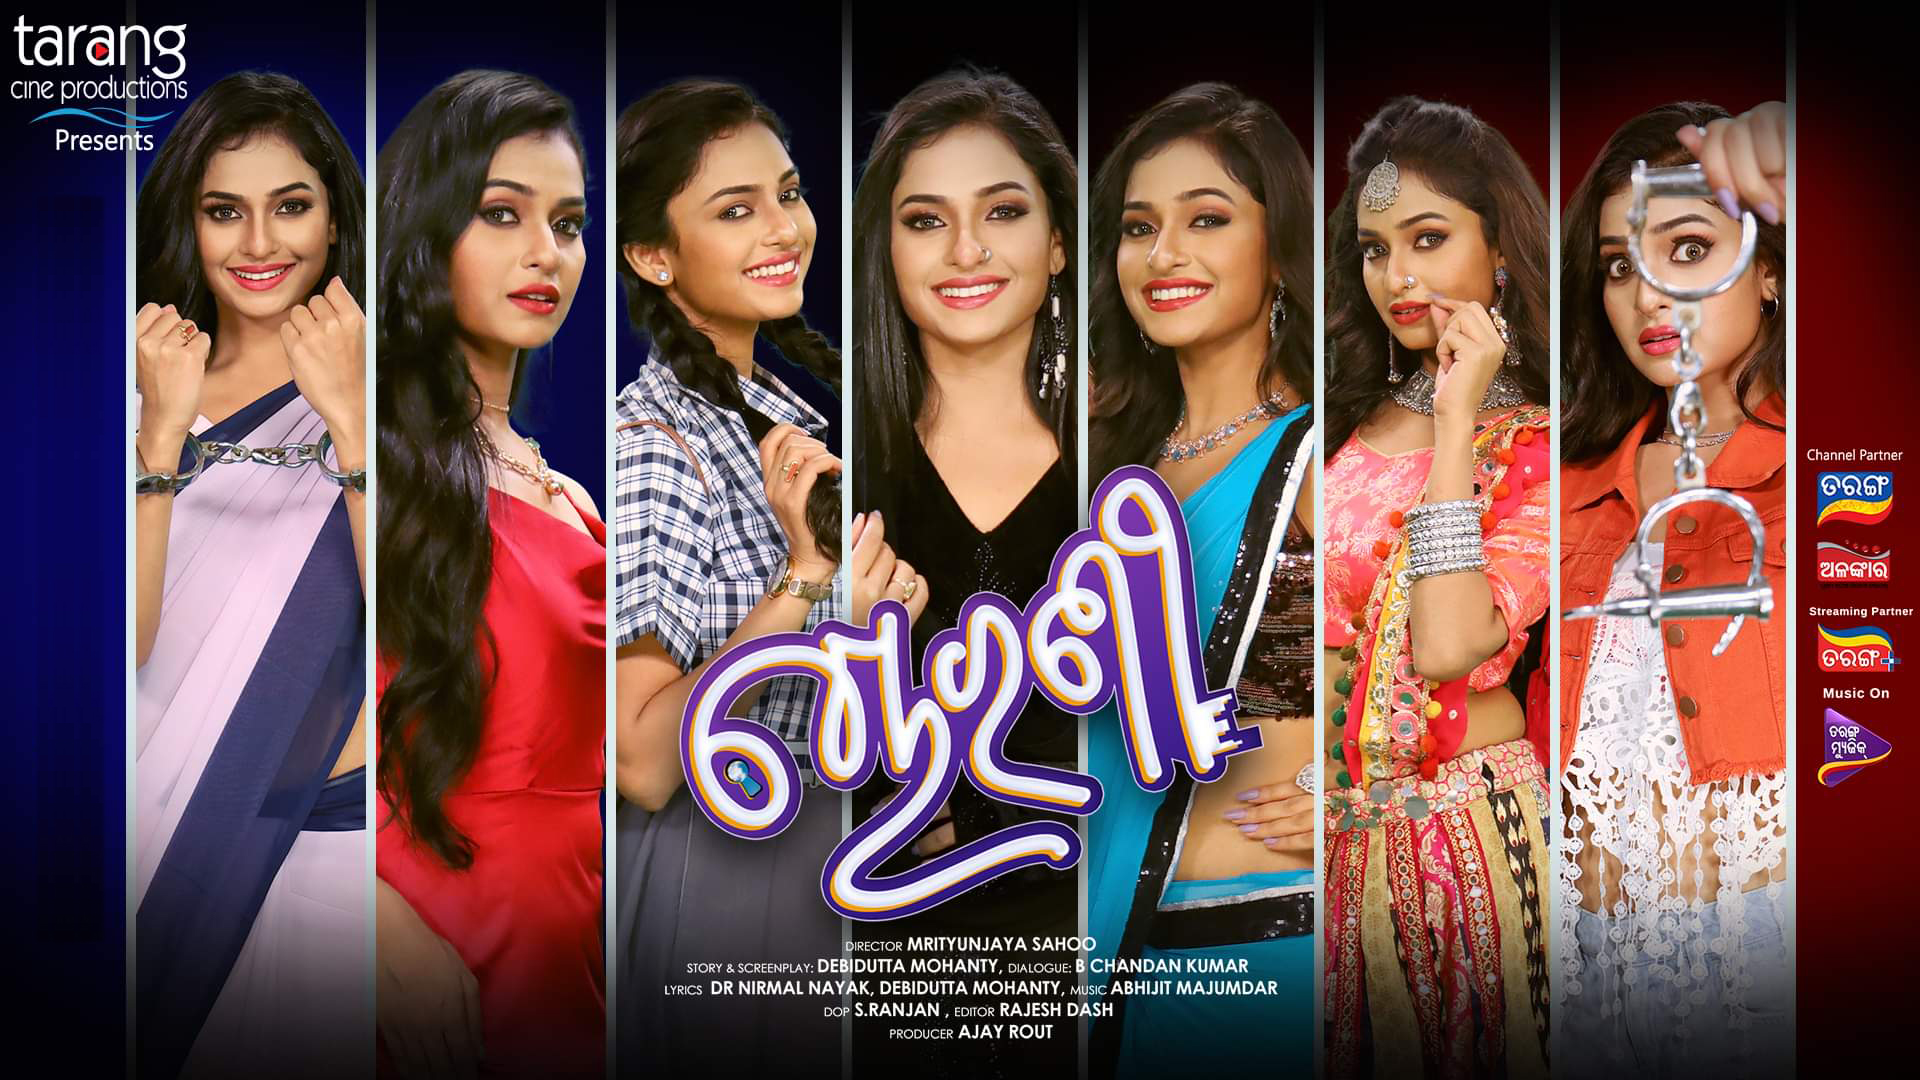 'Chorani' official poster